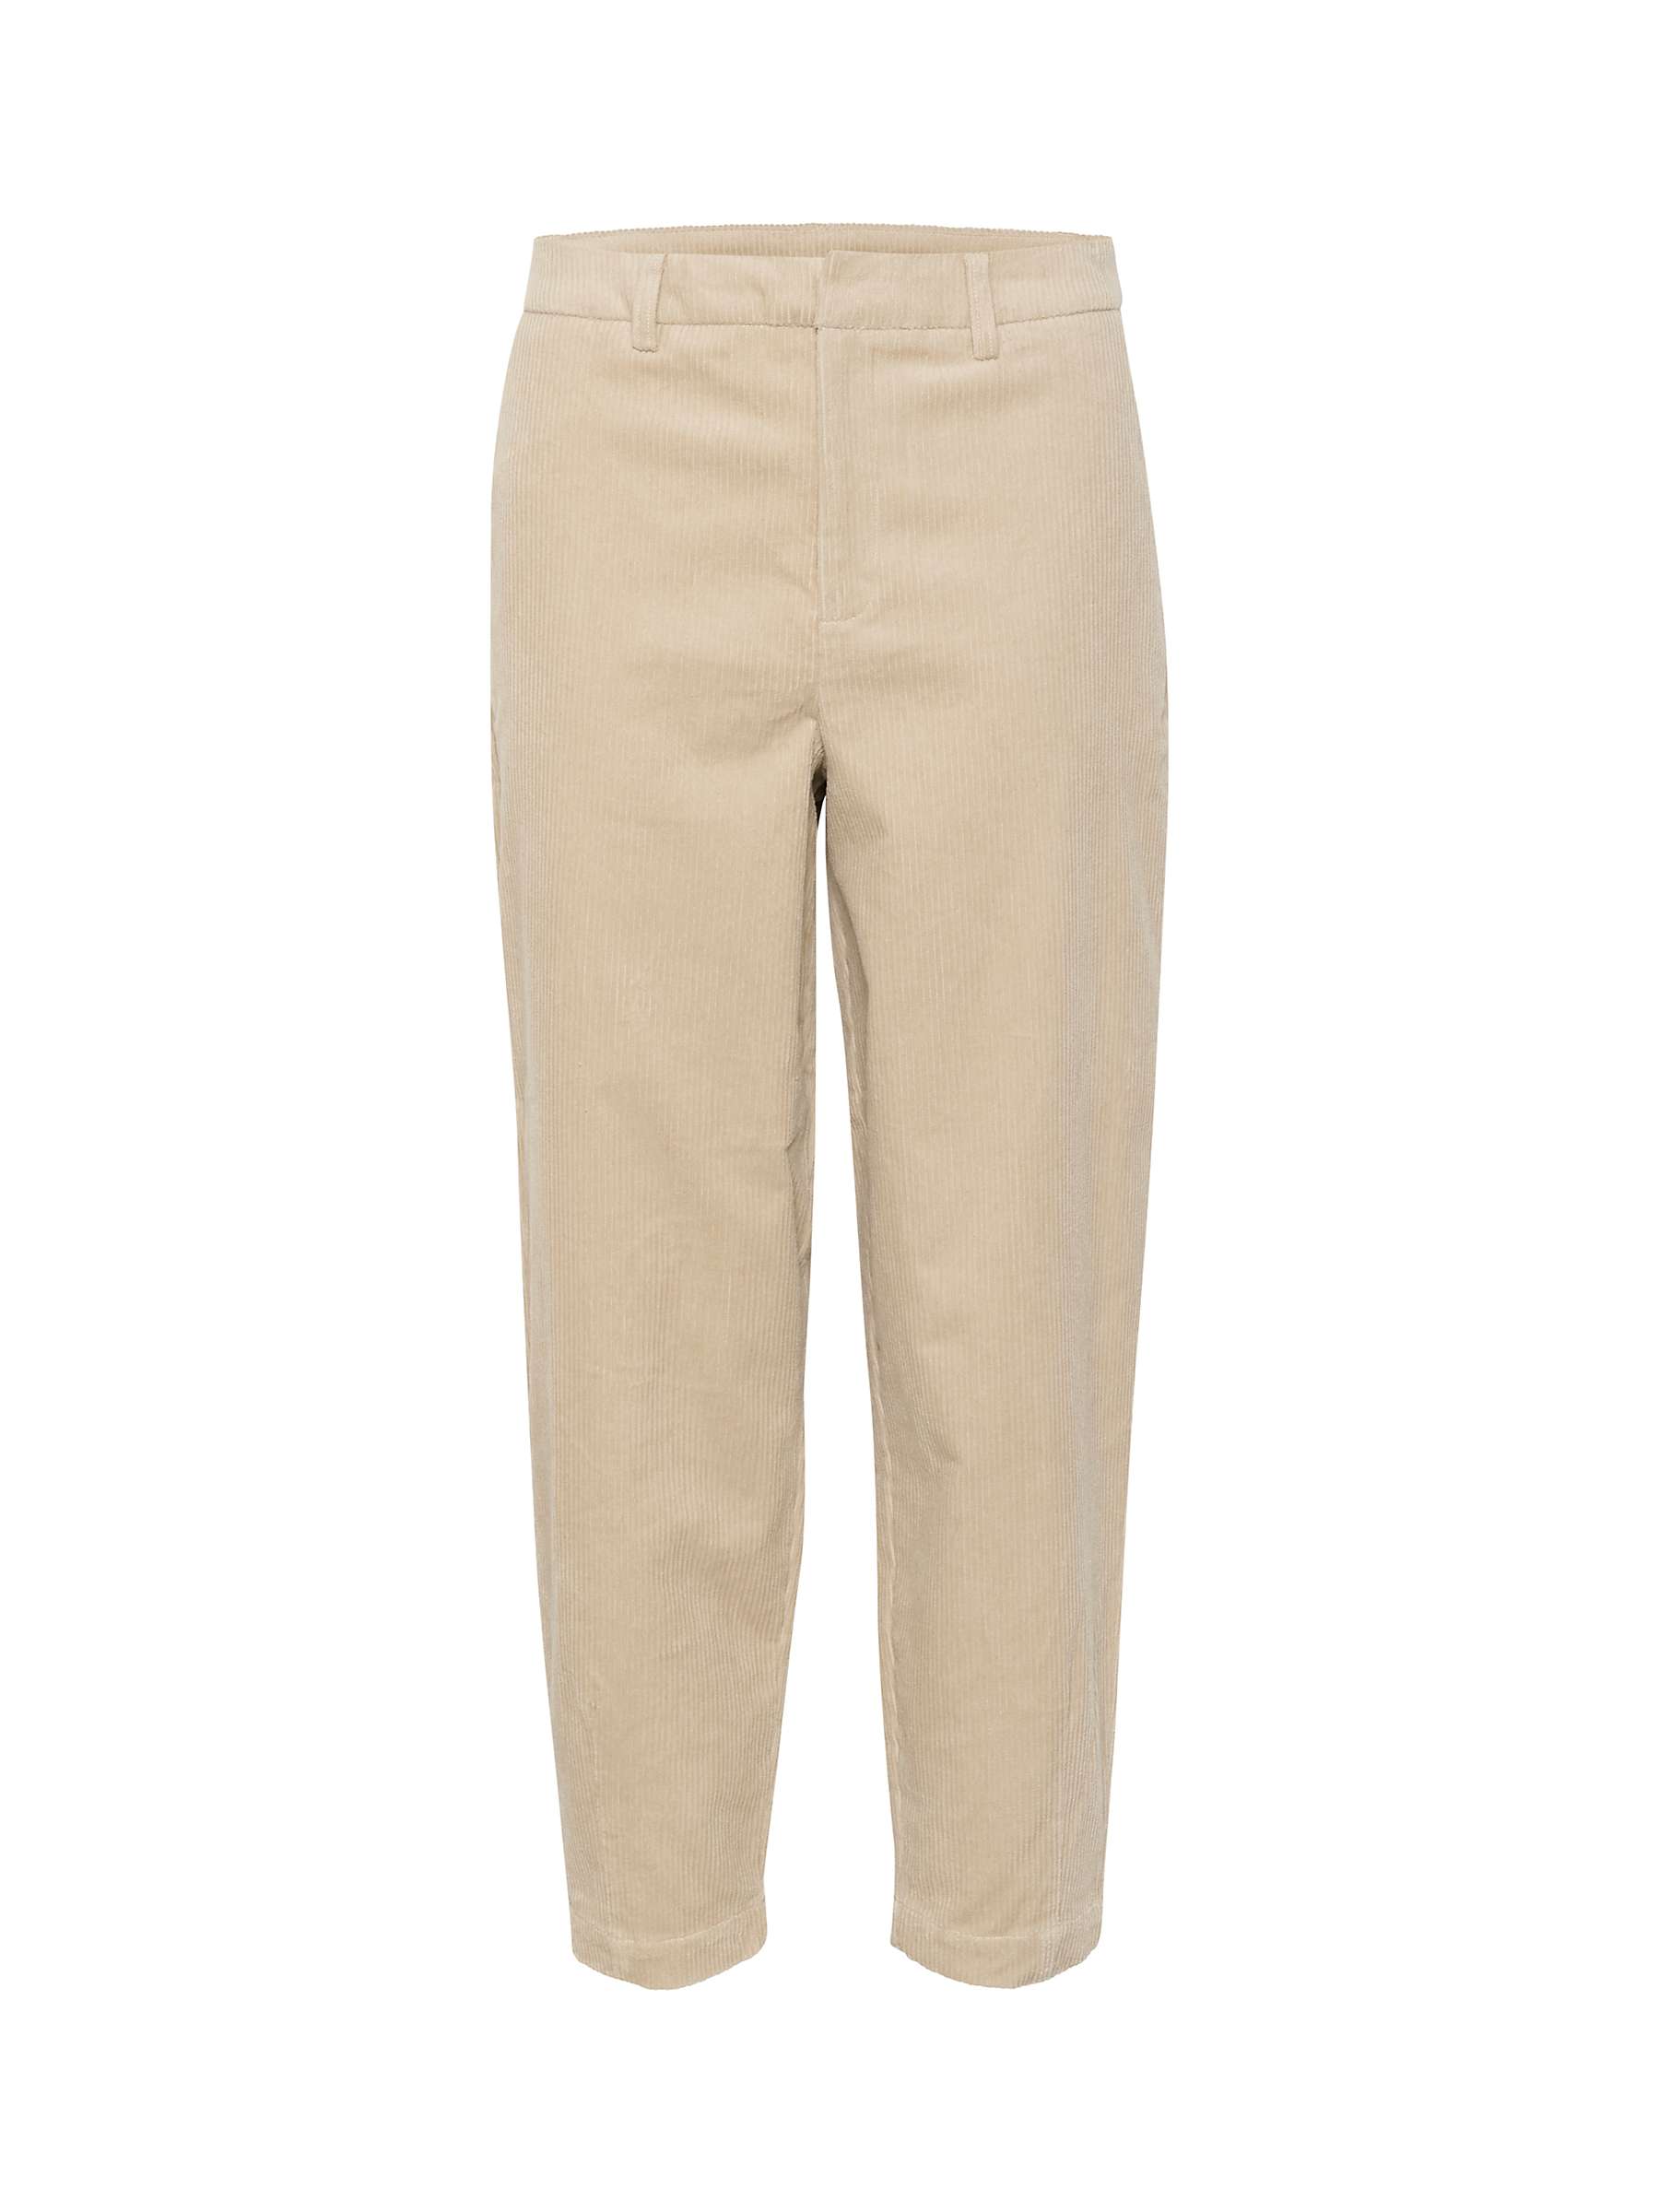 KAFFE Meloi Corduroy Trousers, Feather Grey at John Lewis & Partners